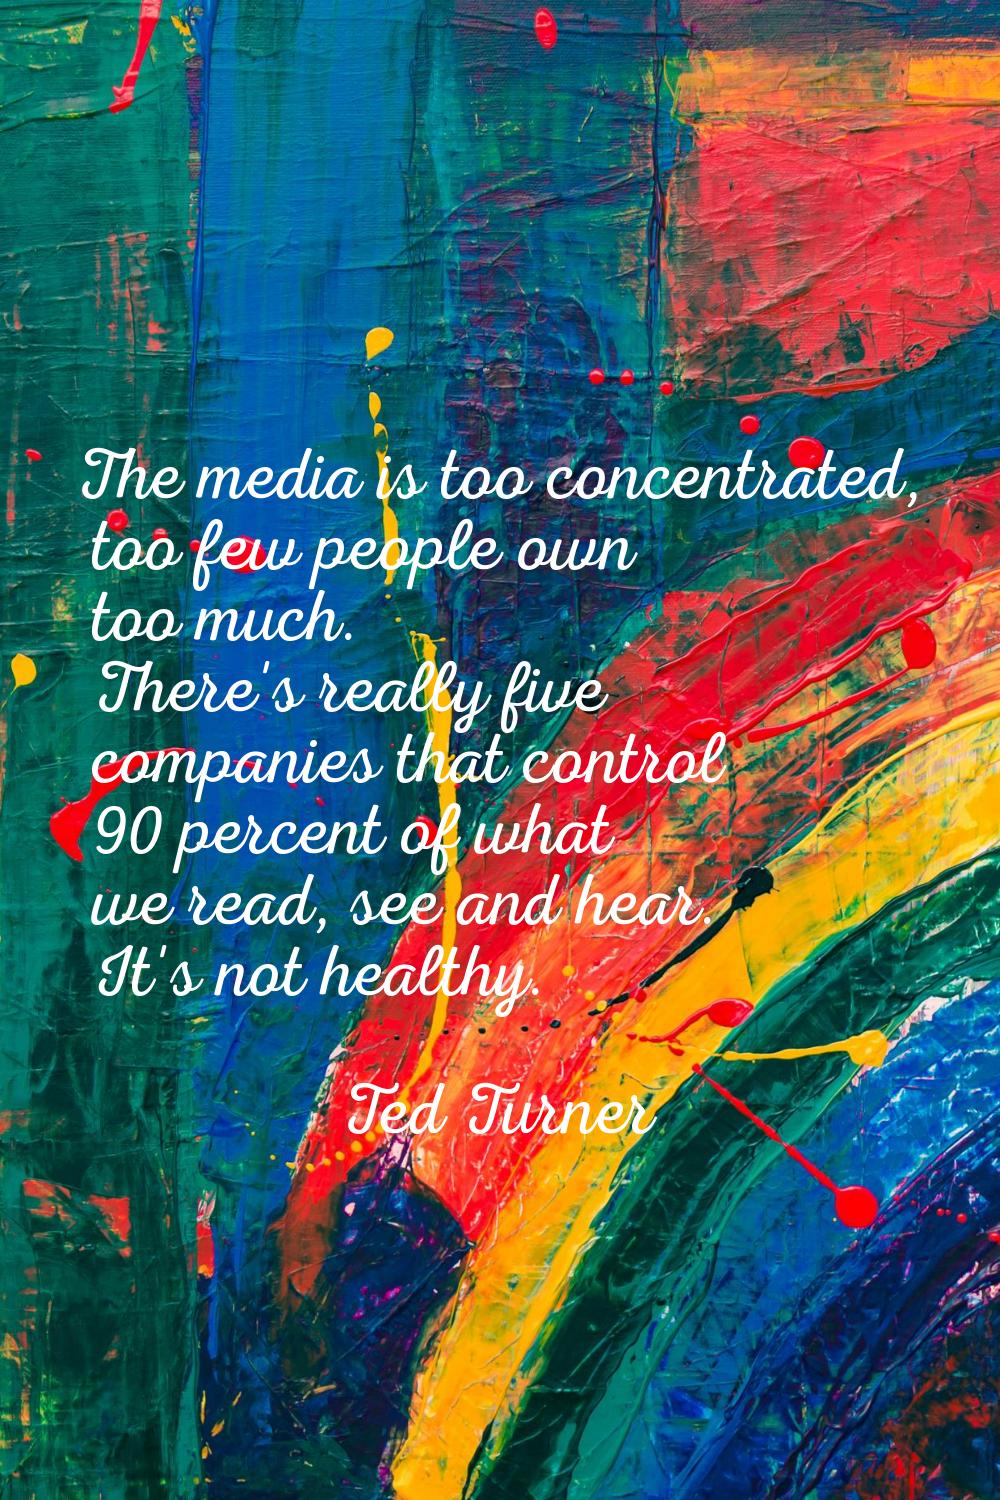 The media is too concentrated, too few people own too much. There's really five companies that cont